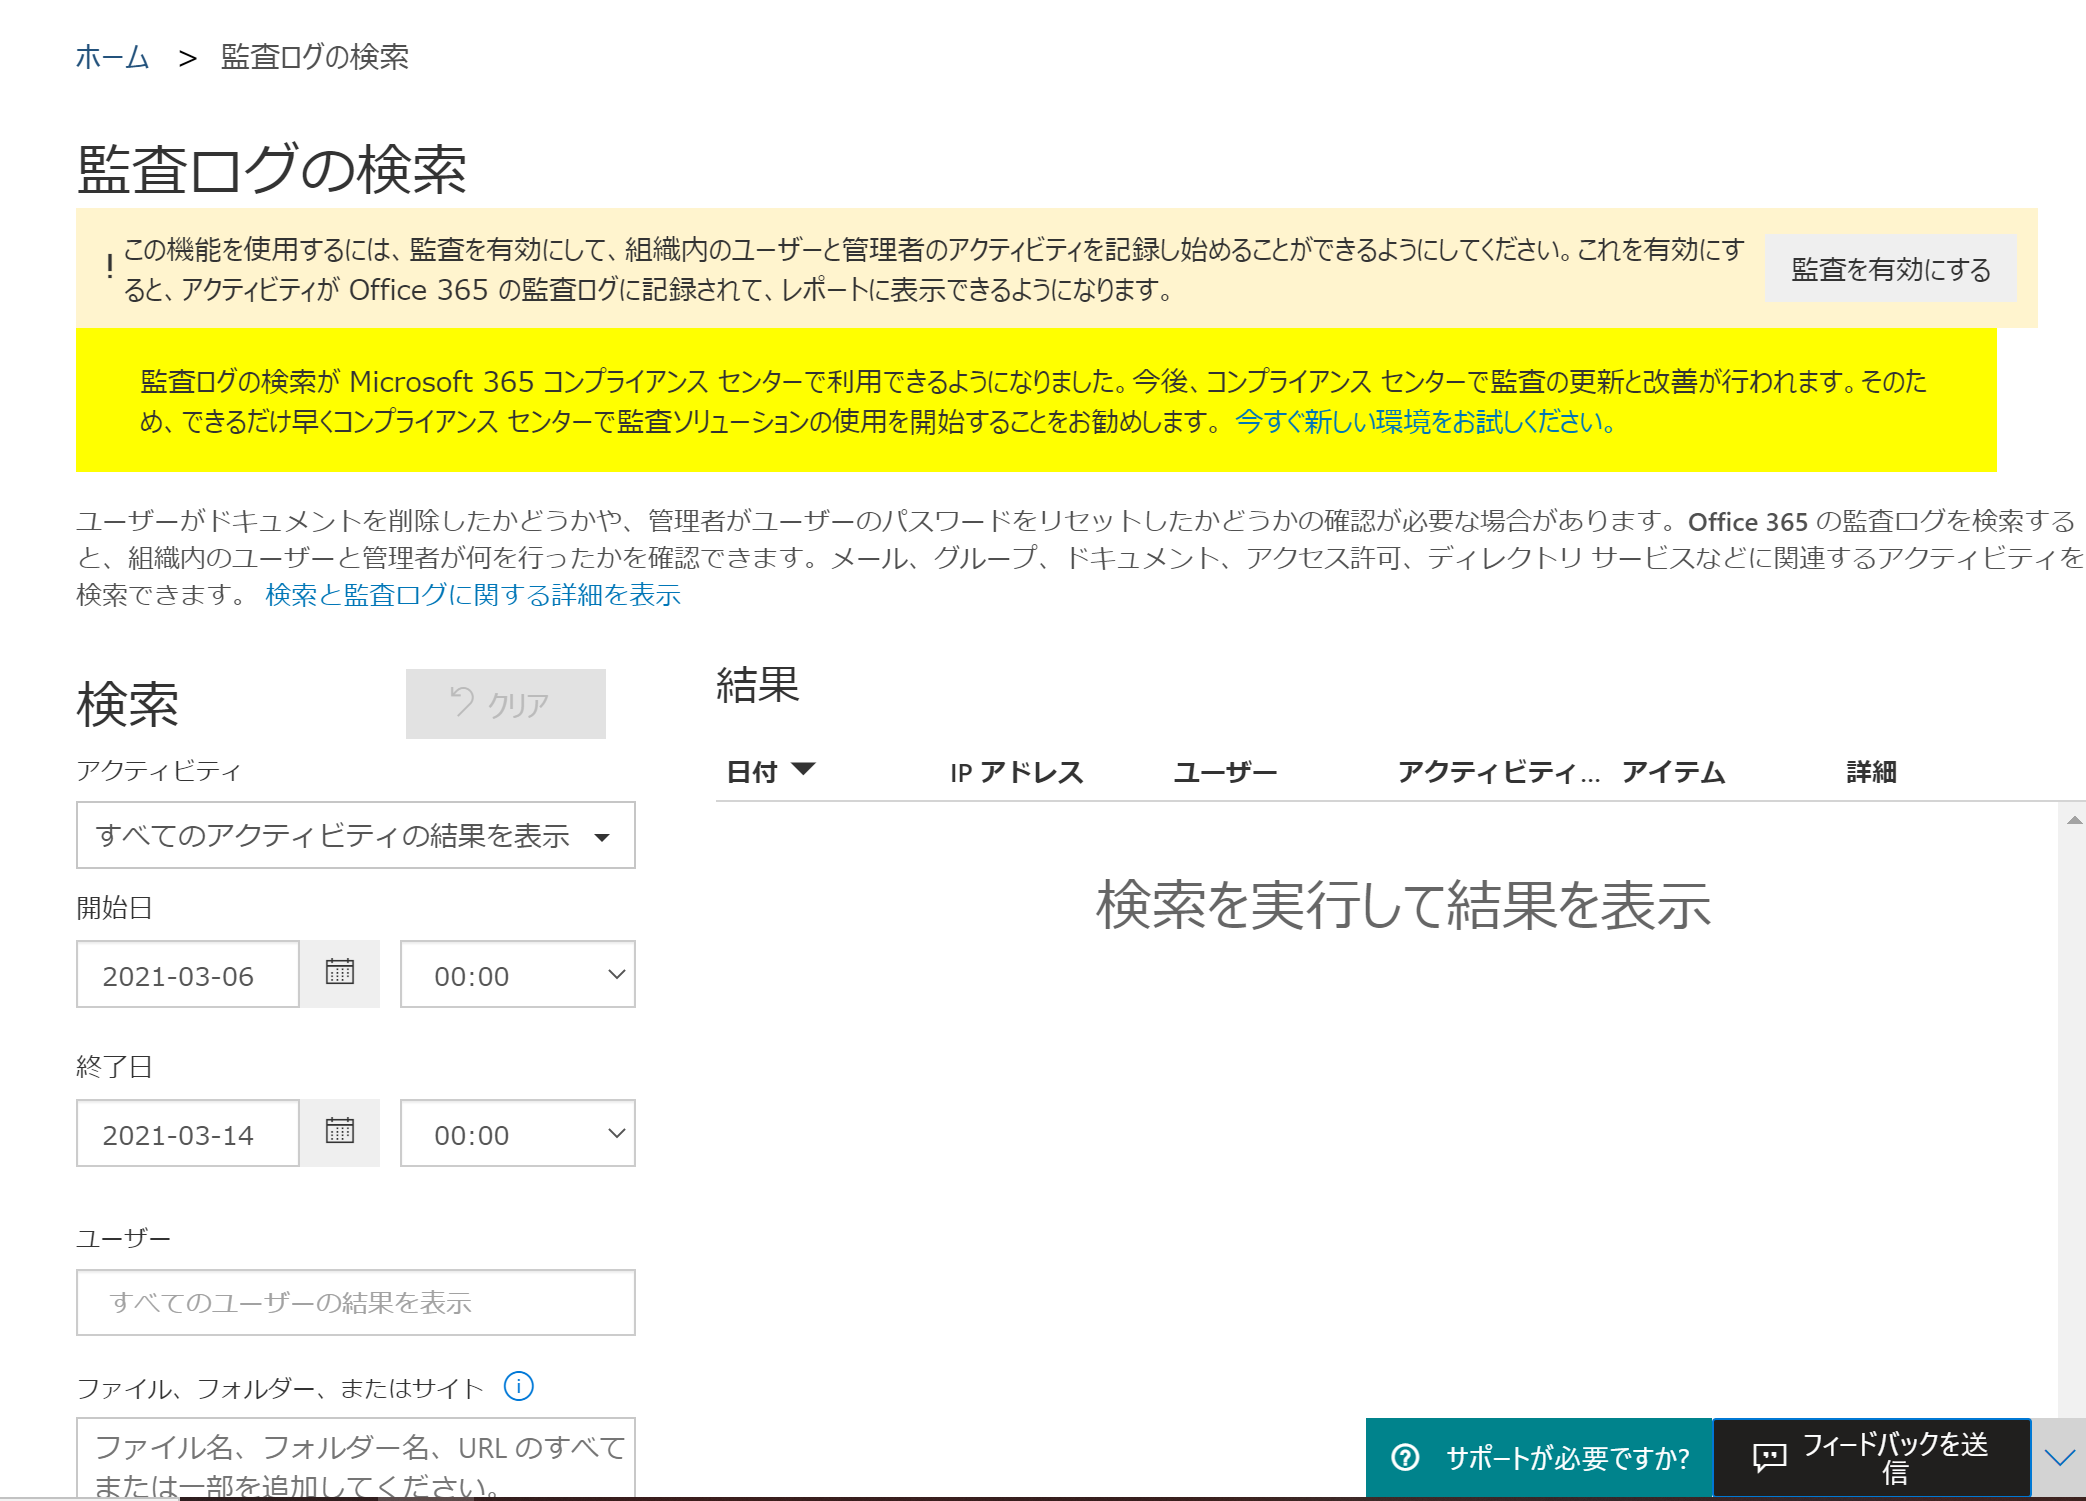 Audit Log Container For Office 365 Jbs 日本ビジネスシステムズ株式会社